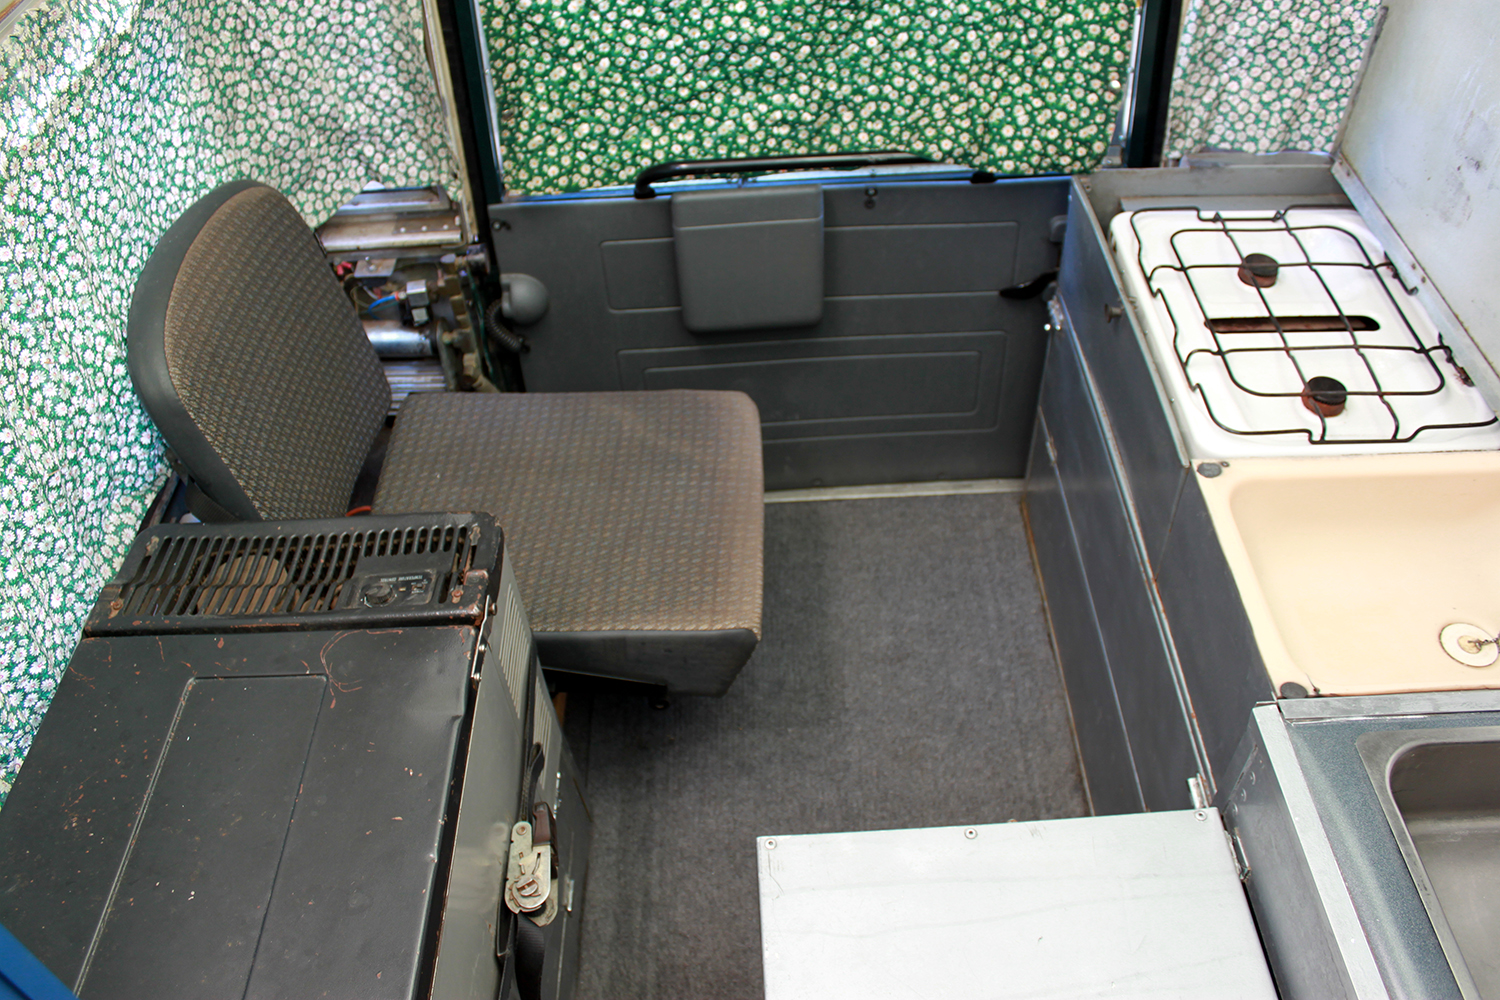 Green Rover rear interior from the front